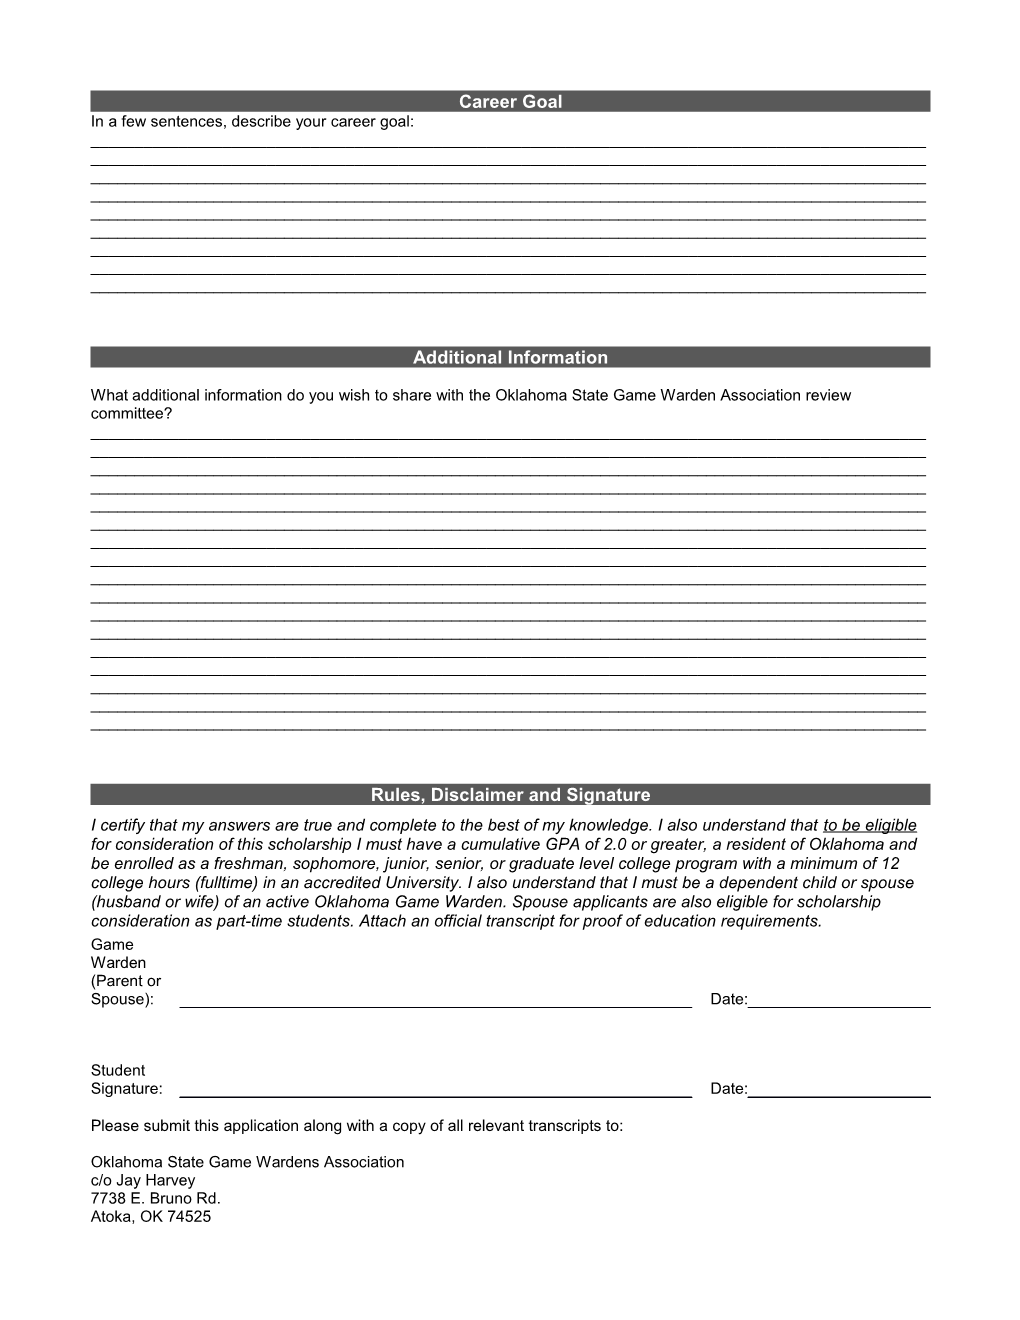 Game Warden Family College Scholarship Application